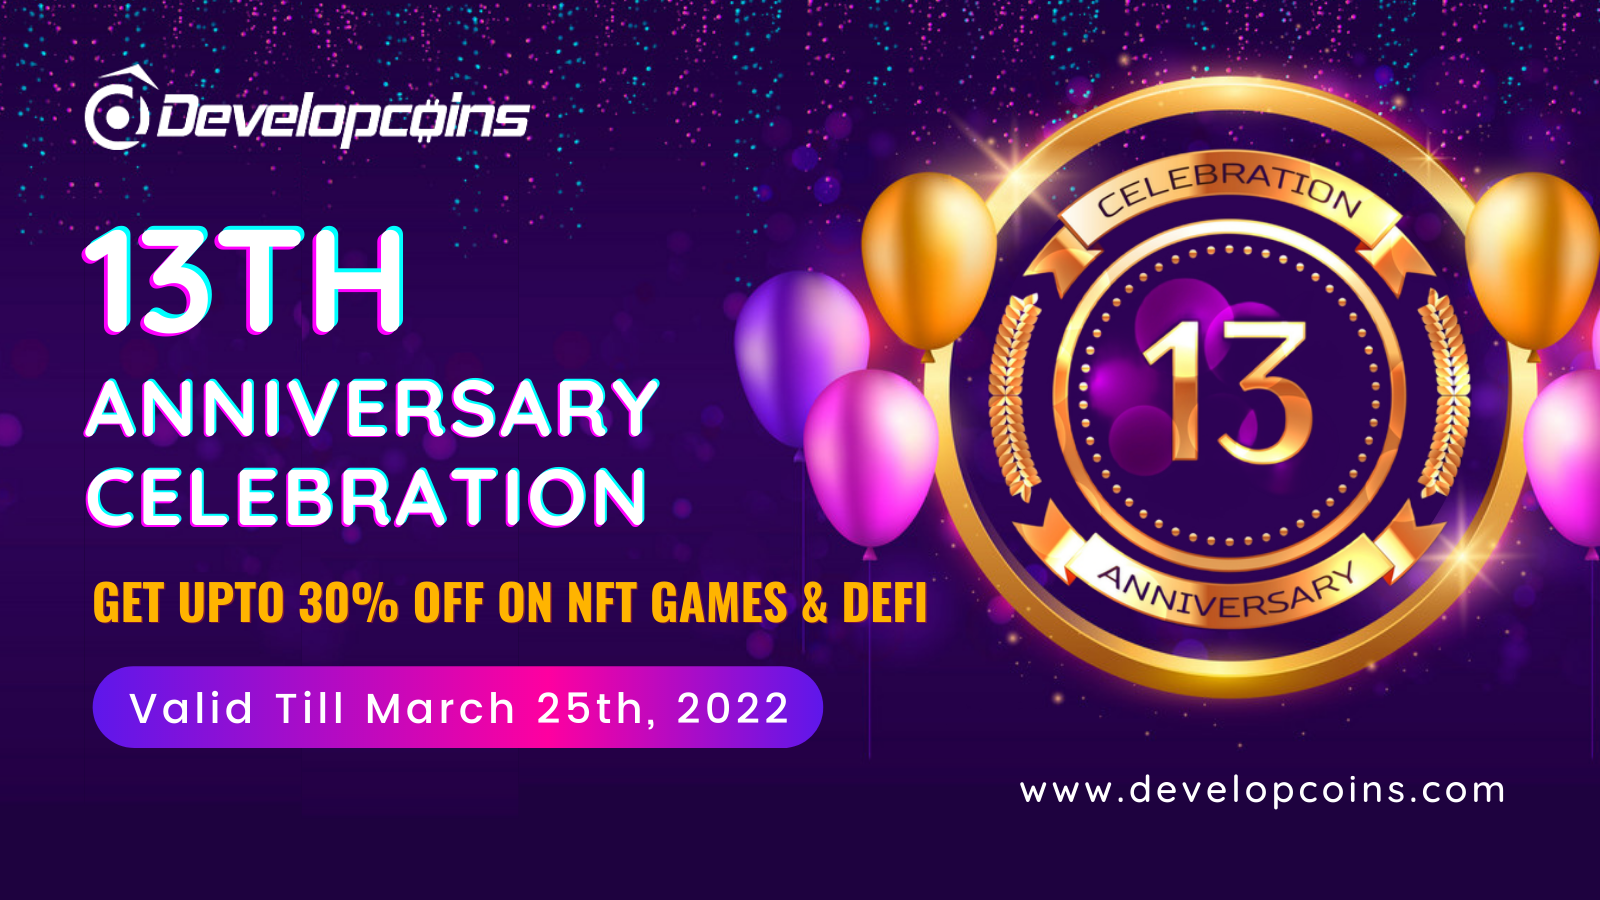 Grab Exclusive Offer Up To 30% for All NFT Games & DeFi Services